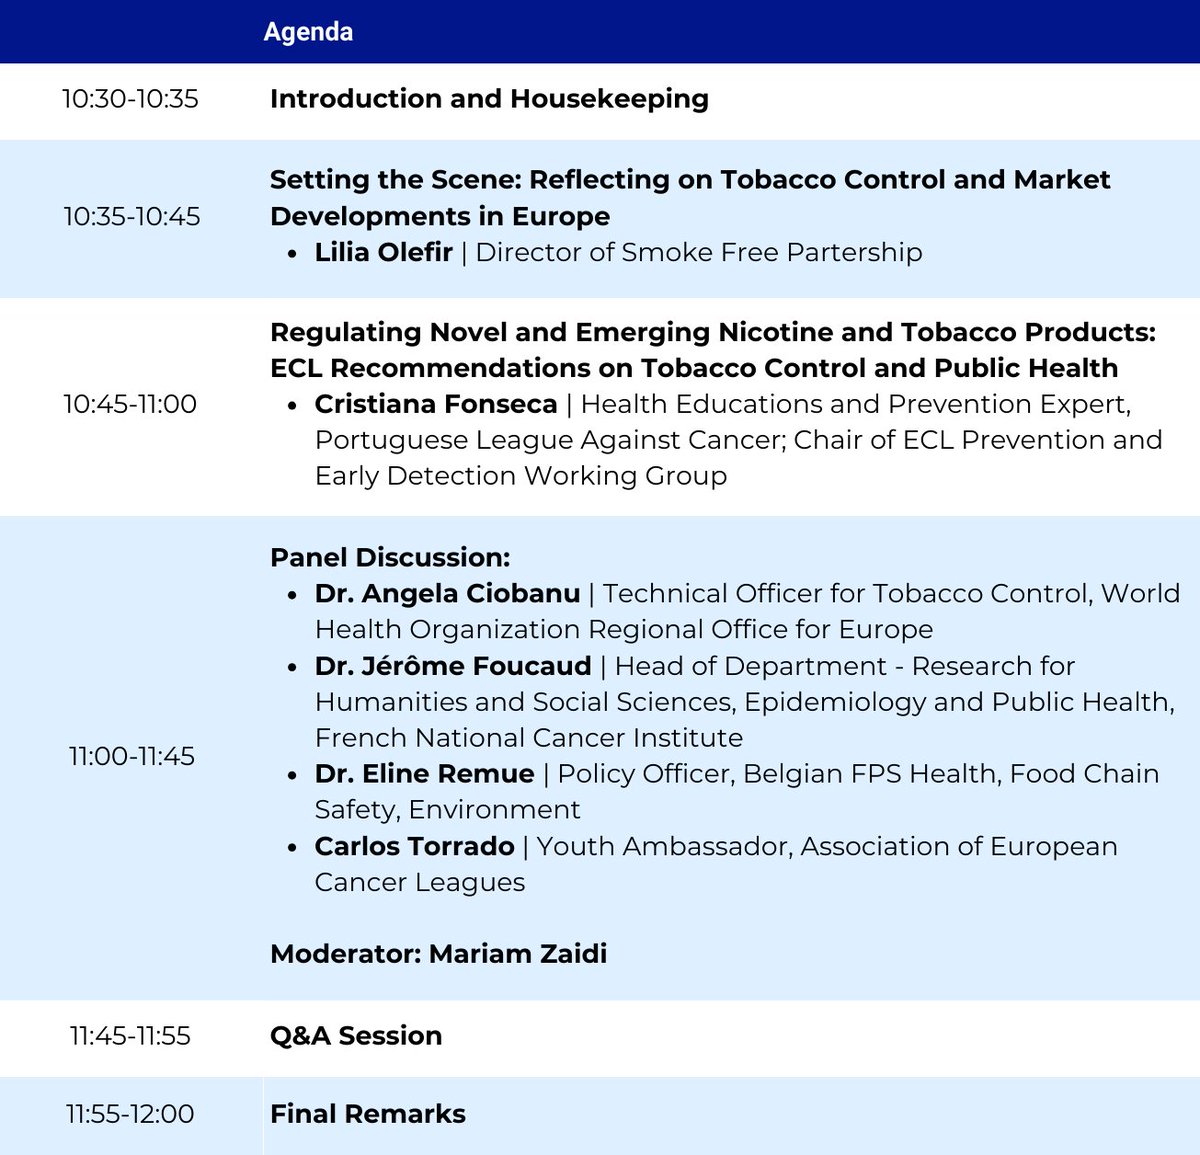 🔔 Friendly Reminder to register! Join us for an insightful panel discussion on #TobaccoControl in the EU. Agenda available below ⬇️ 🗓️ May 31, 10:30am CEST Webinar registration ➡️ bit.ly/3VRNLt3 #EuropeanWeekAgainstCancer #WorldNoTobaccoDay #TobaccoFreeGeneration